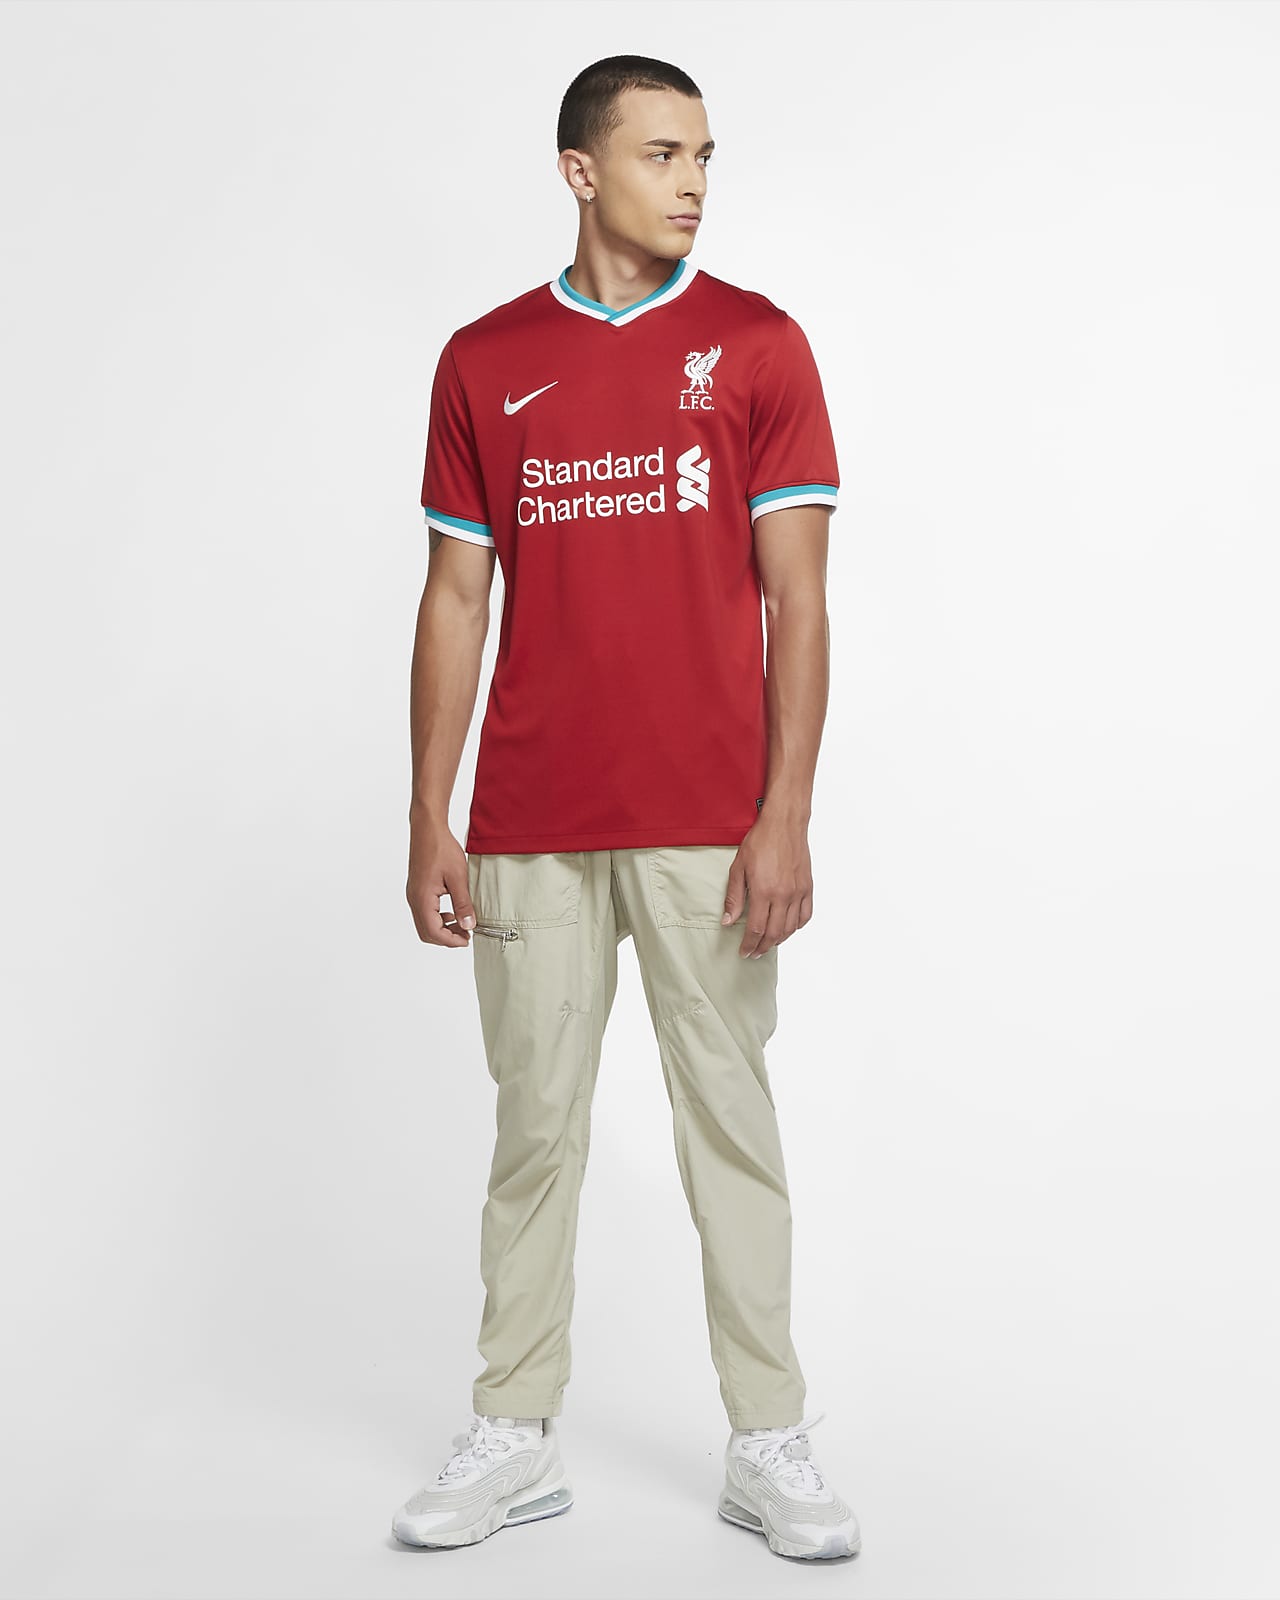 liverpool official nike kit